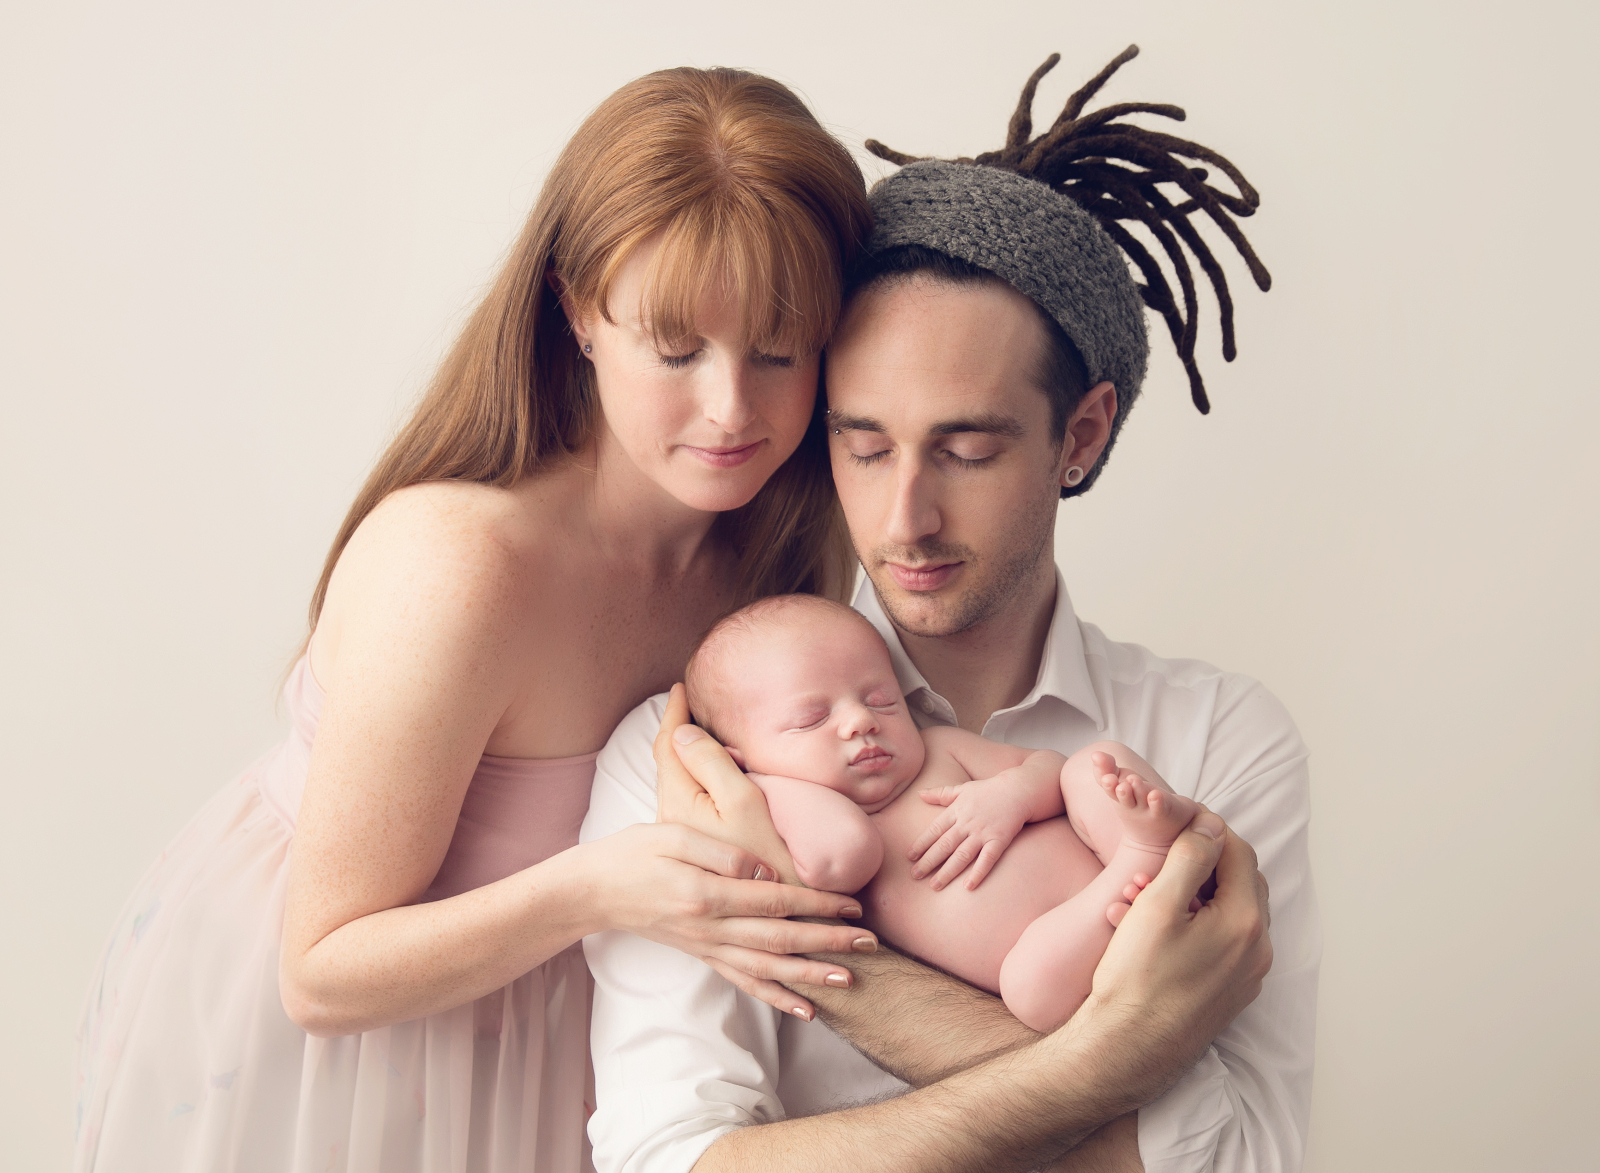 Studio portrait with light background of a happy mother and father, smiling together with their sleeping newborn baby in the mother's arms. Image by Helga Himer Photography, Sudbury, Ontario.